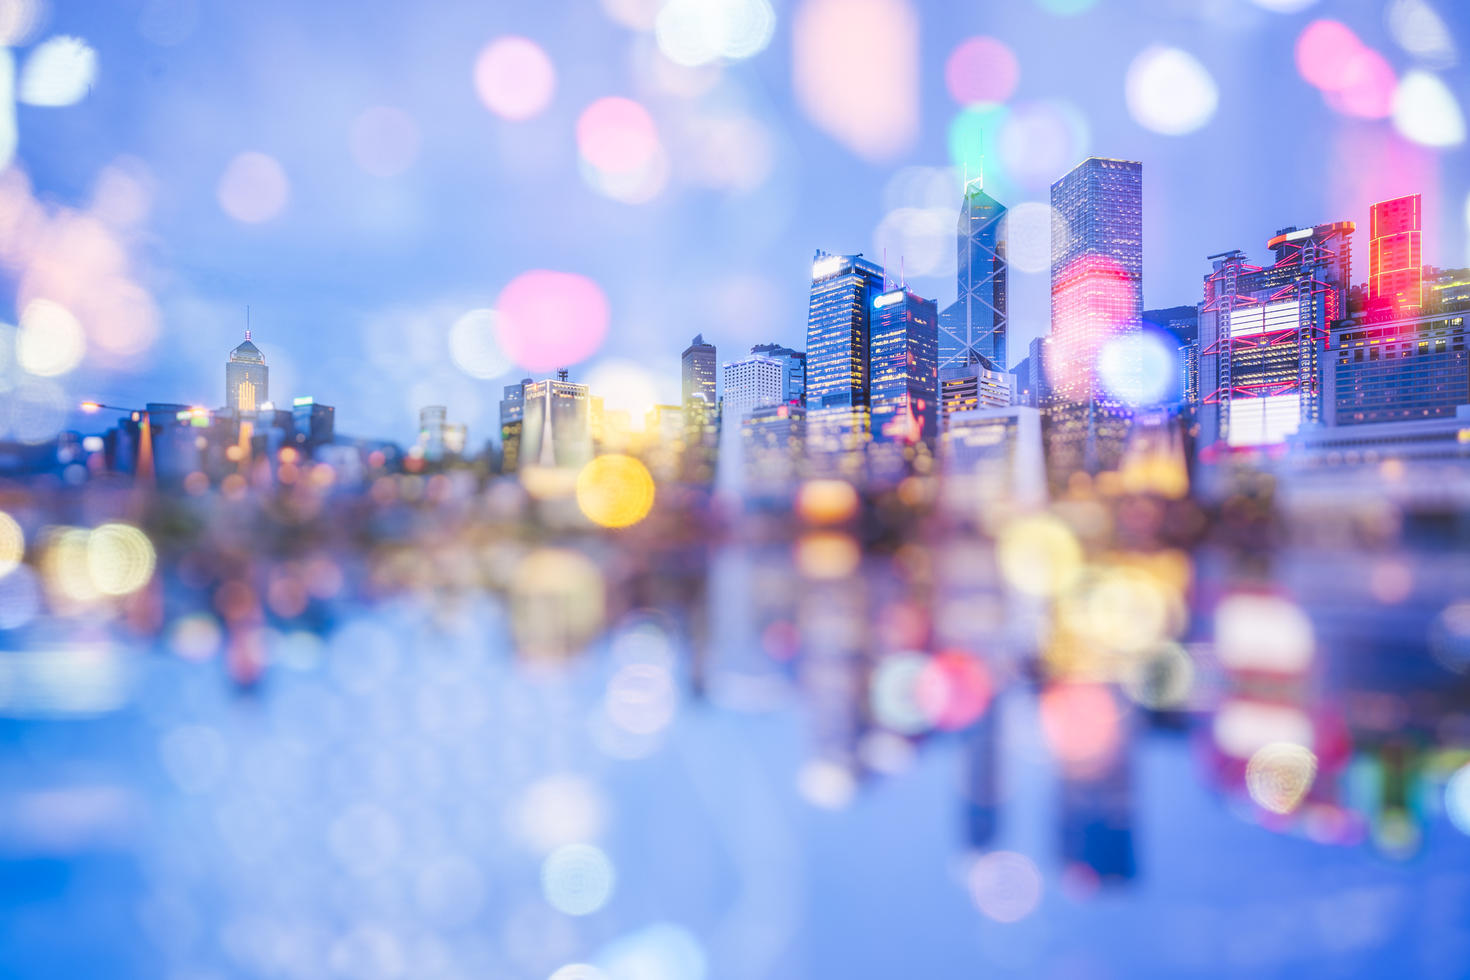 City skyline at night with blurred lights.